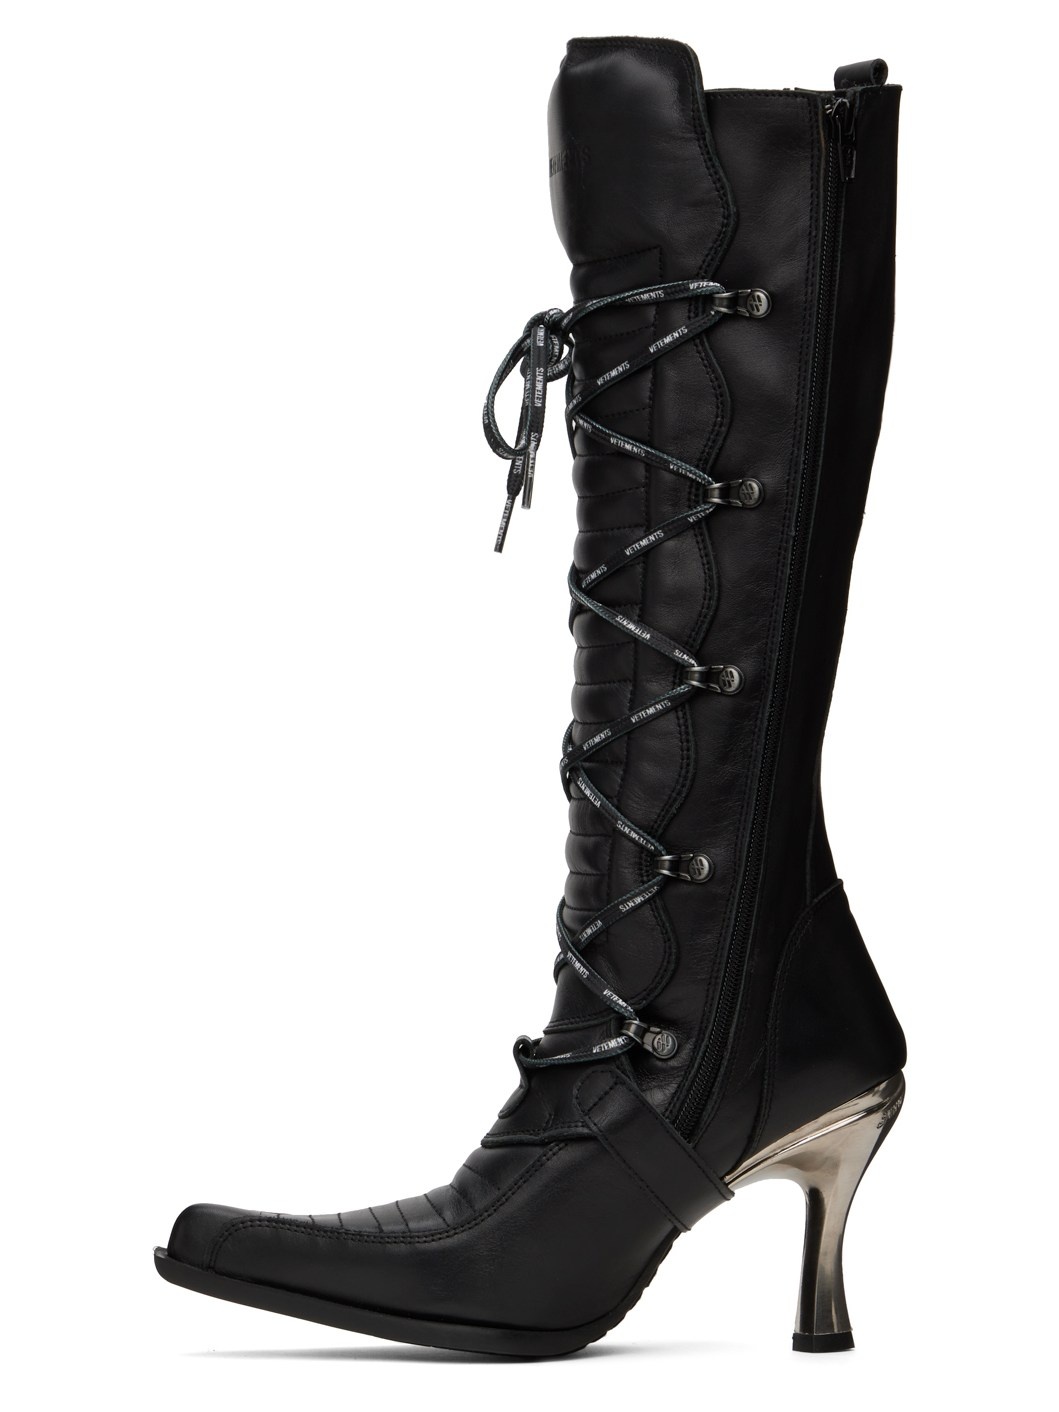 Black New Rock Edition Moto Lace-Up Boots - 3